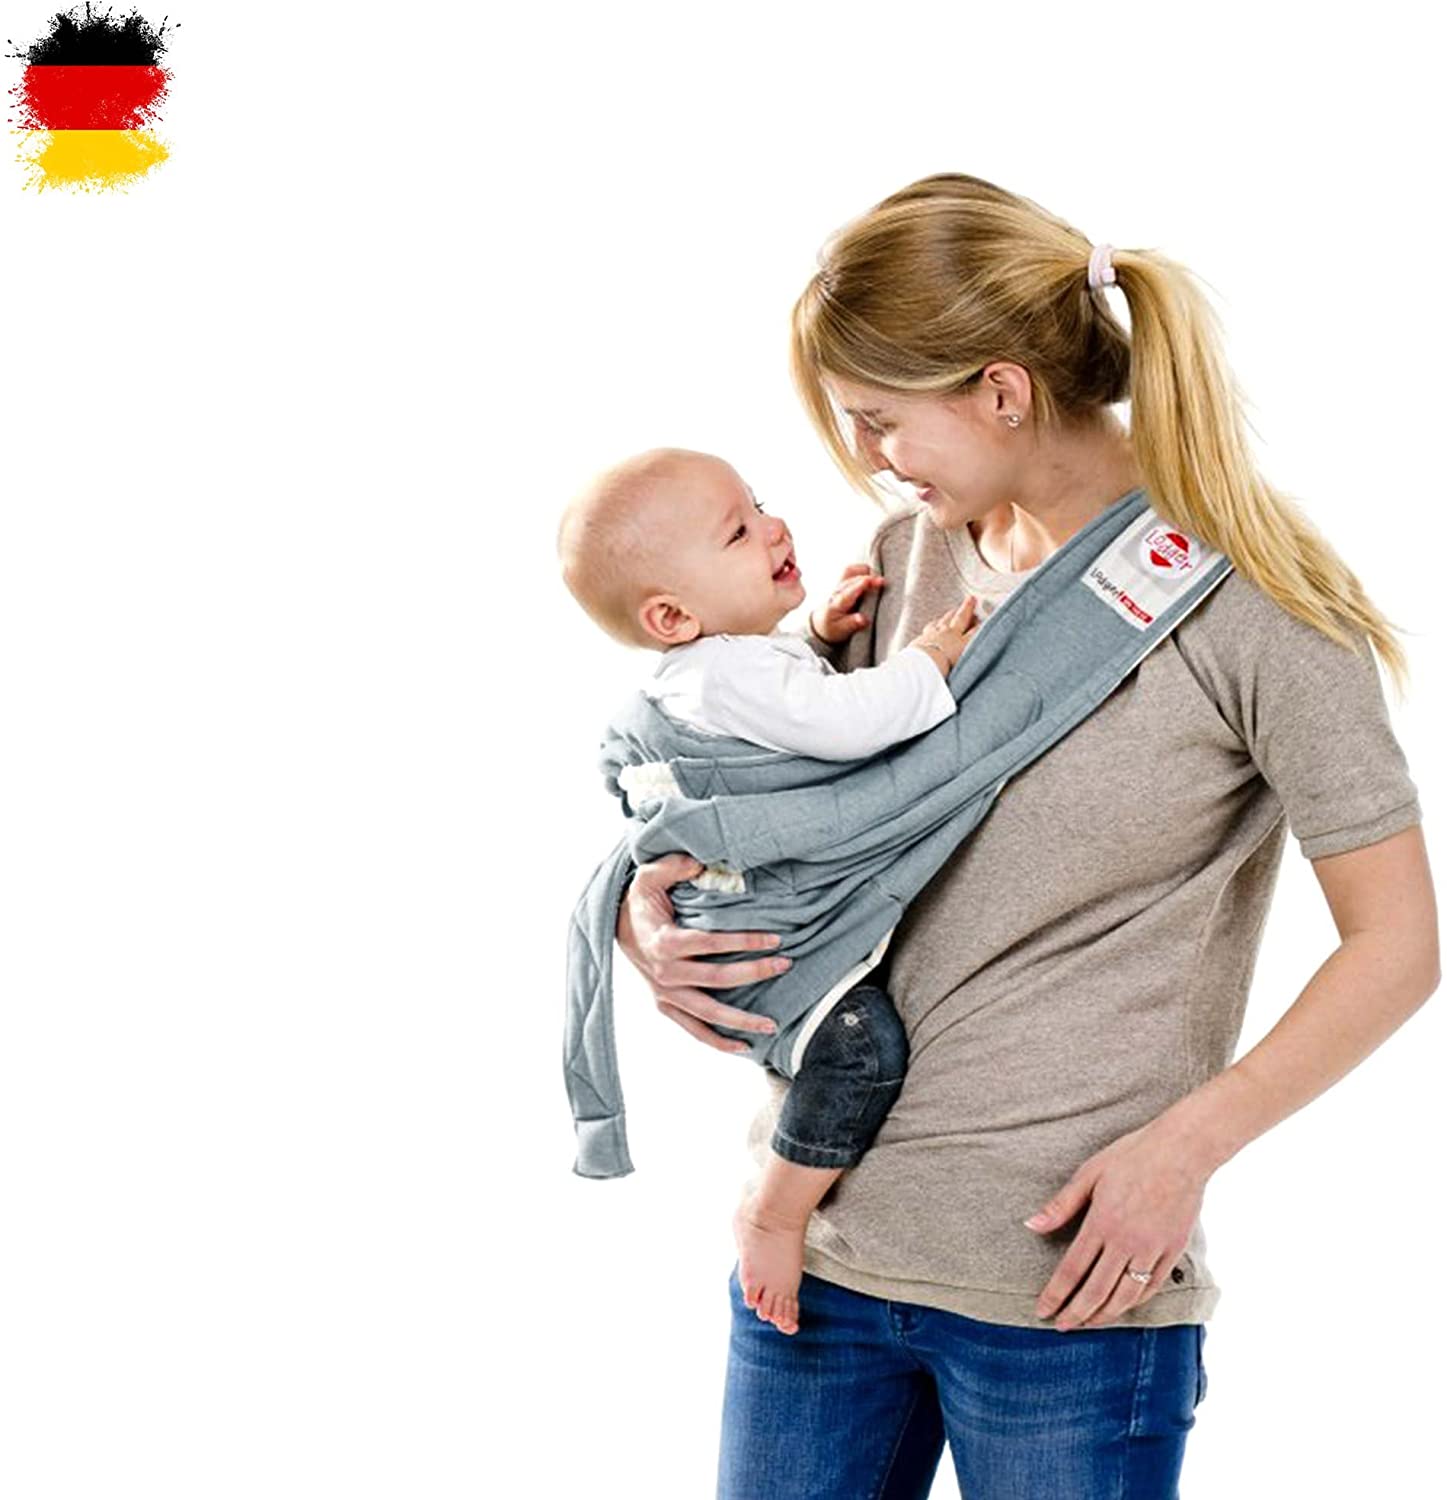 Lodger Shelter 2.0 3-in-1 Baby Carrier Baby Sling Baby Sling Travel Rug for Baby & Parents, from Birth to 18 months (12 kg Maximum Load), Secure Locking Mechanism Carrying for Babies and Children Beautiful Design New And In Original Packaging